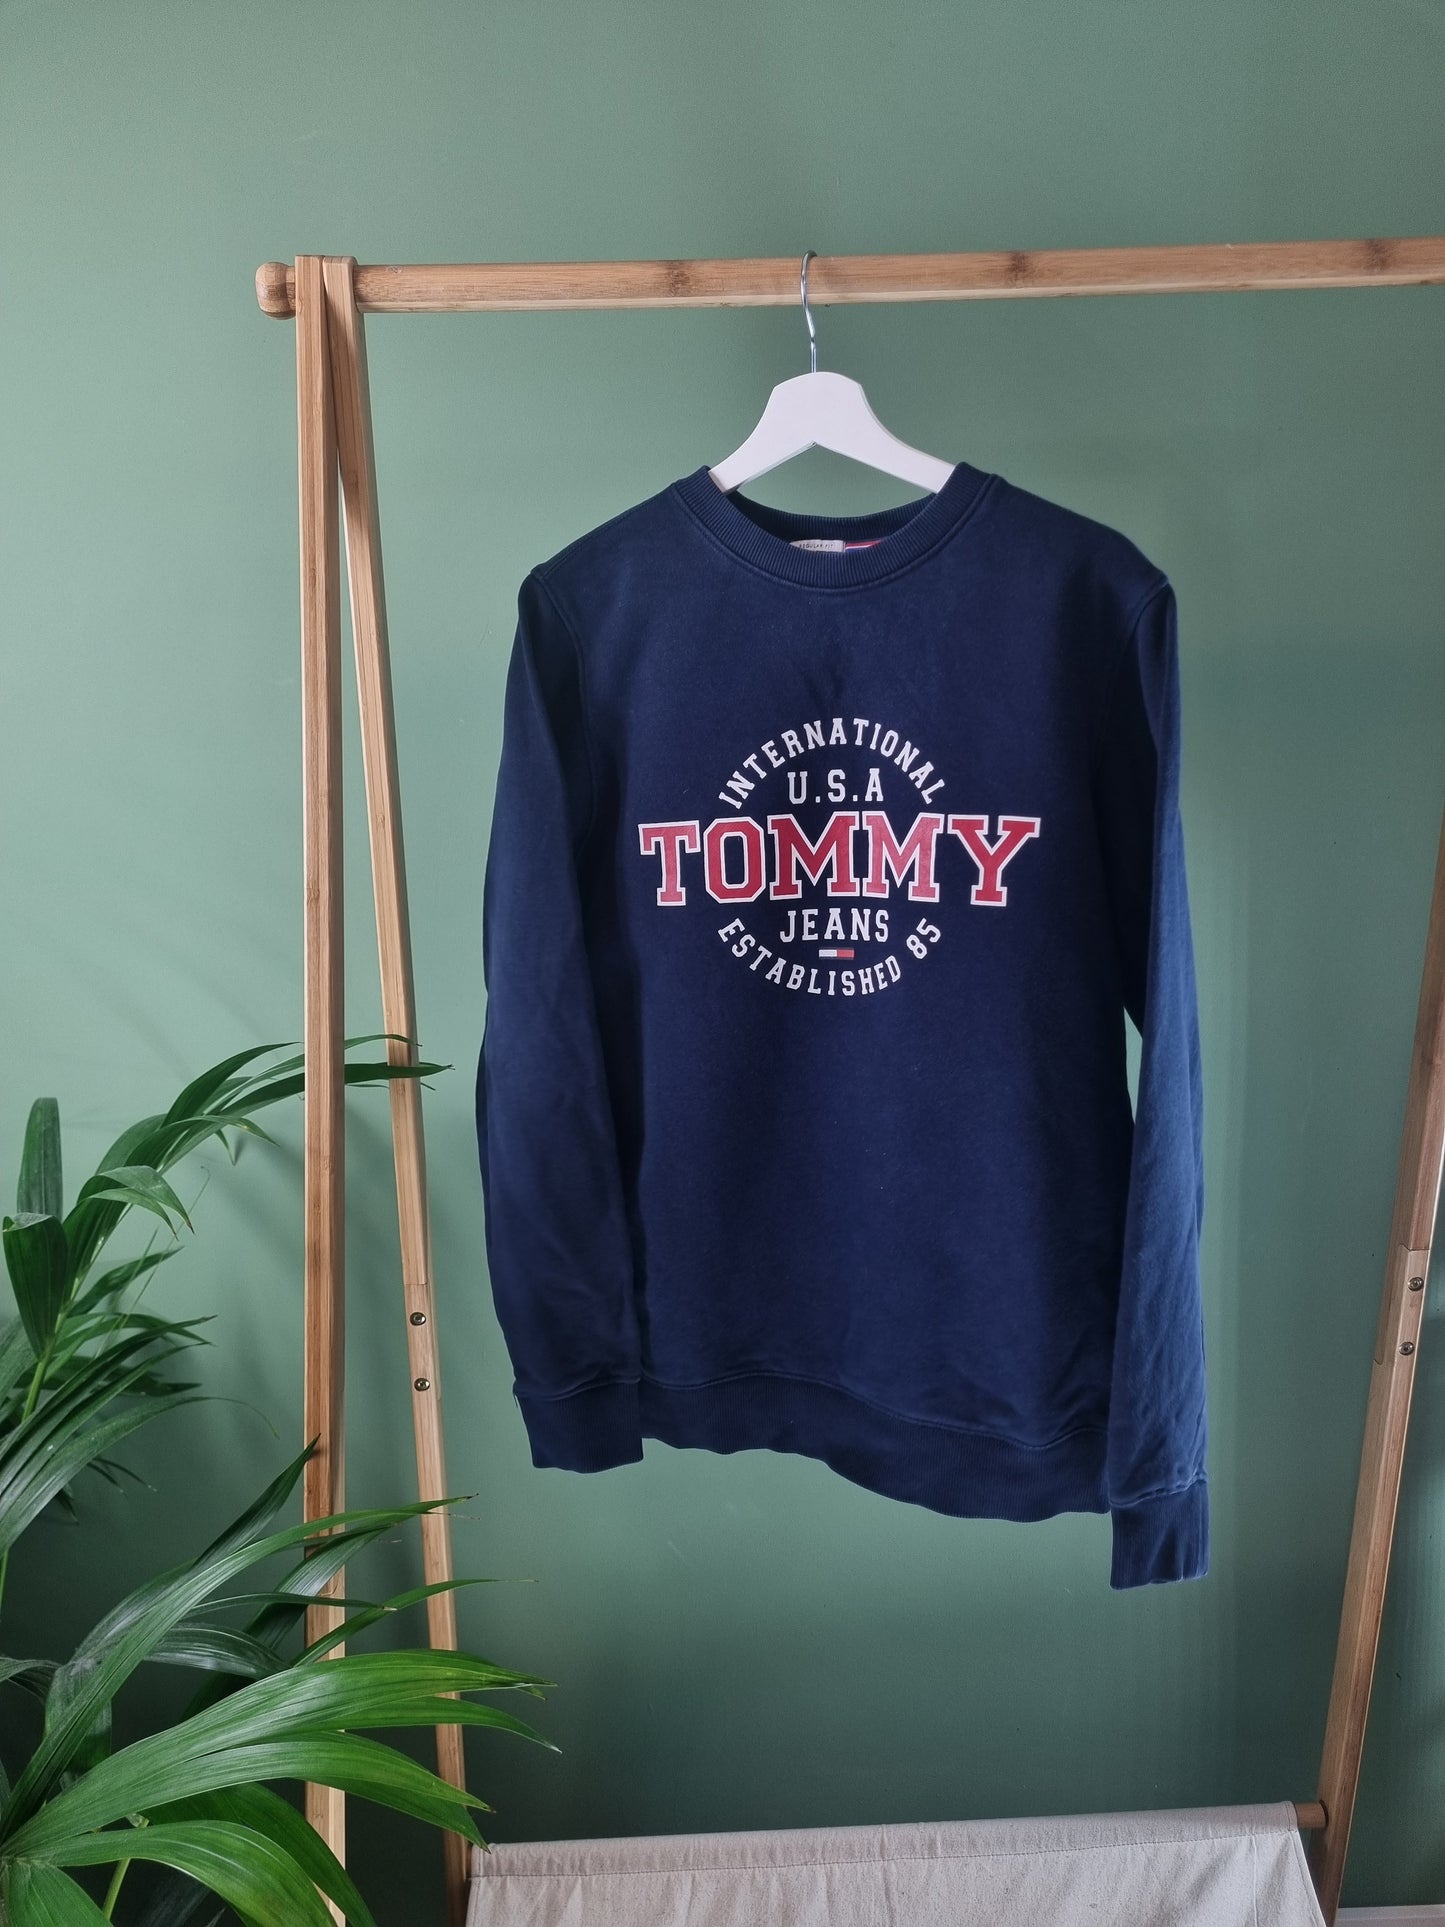 Tommy Hilfiger sweater maat S